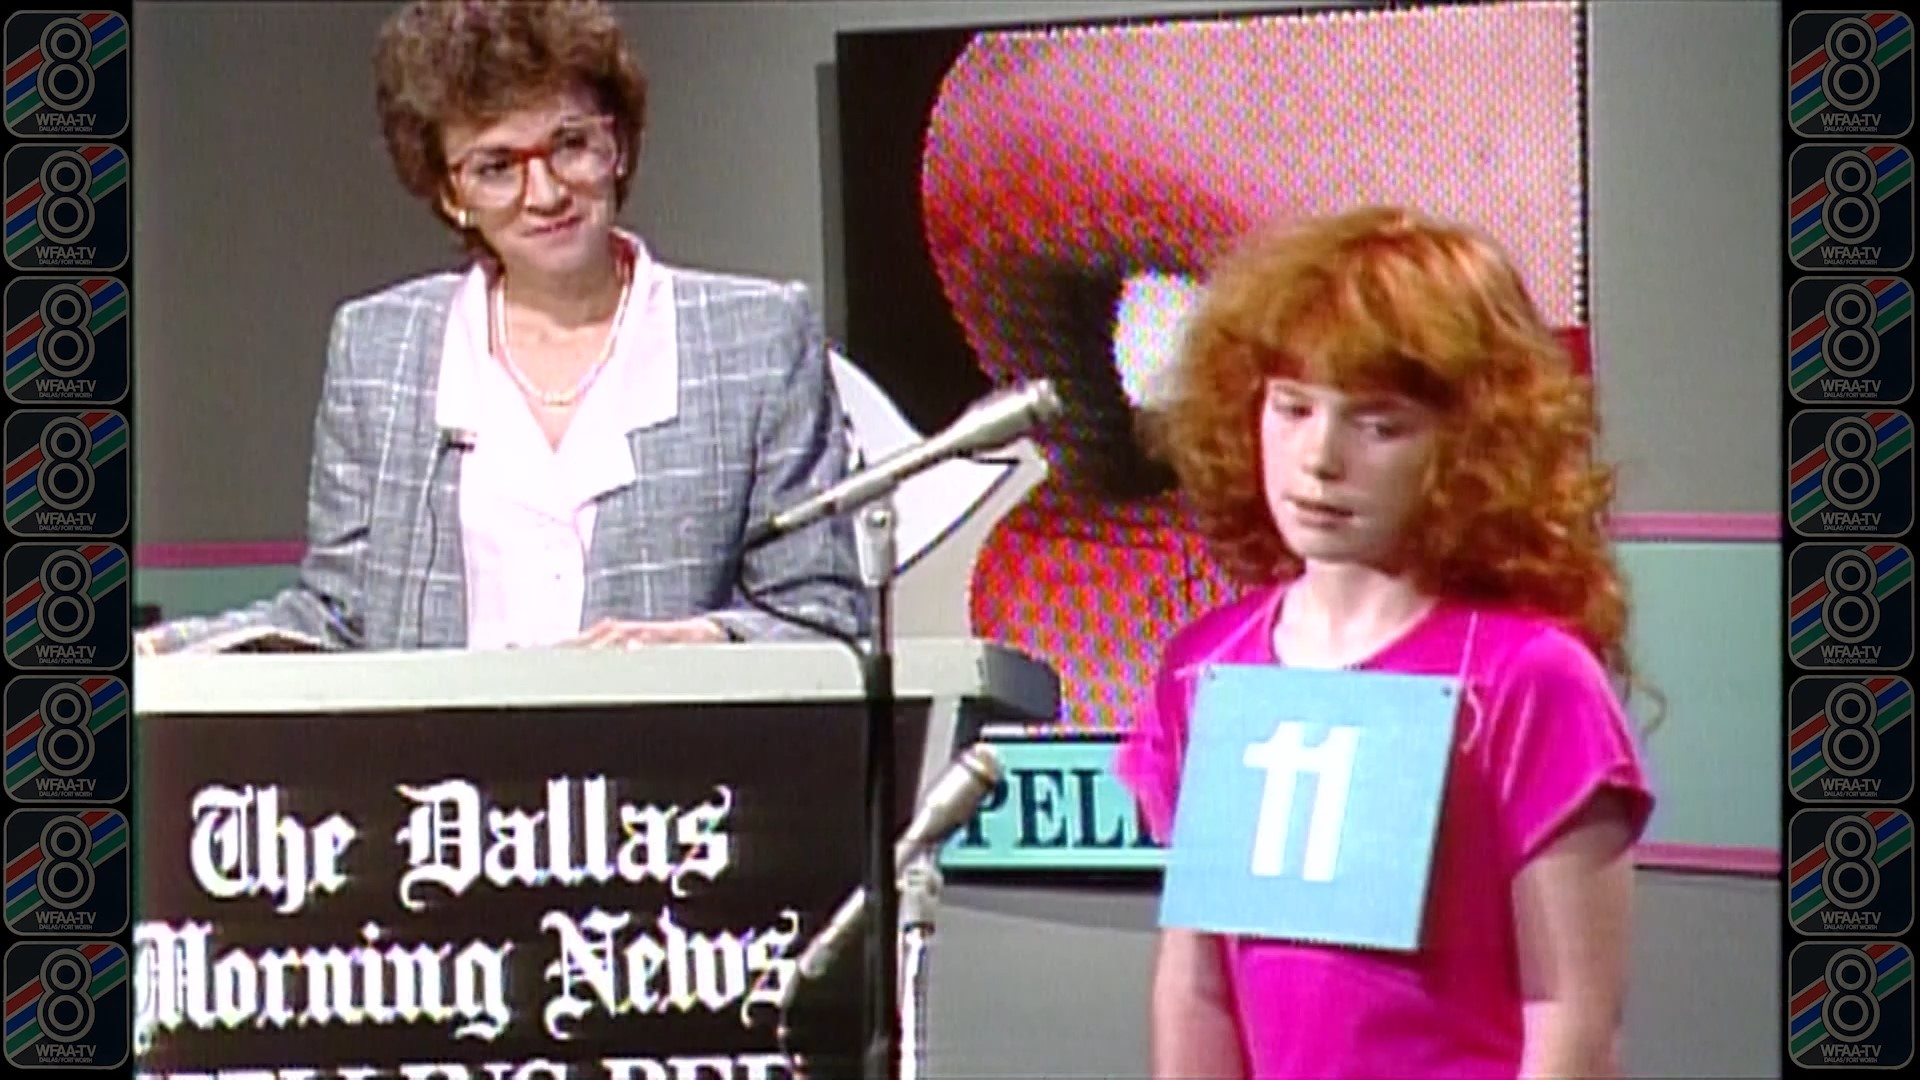 Take a step into the past and watch some North Texas kids compete in the 1987 Dallas Morning News Regional Spelling Bee presented by WFAA.